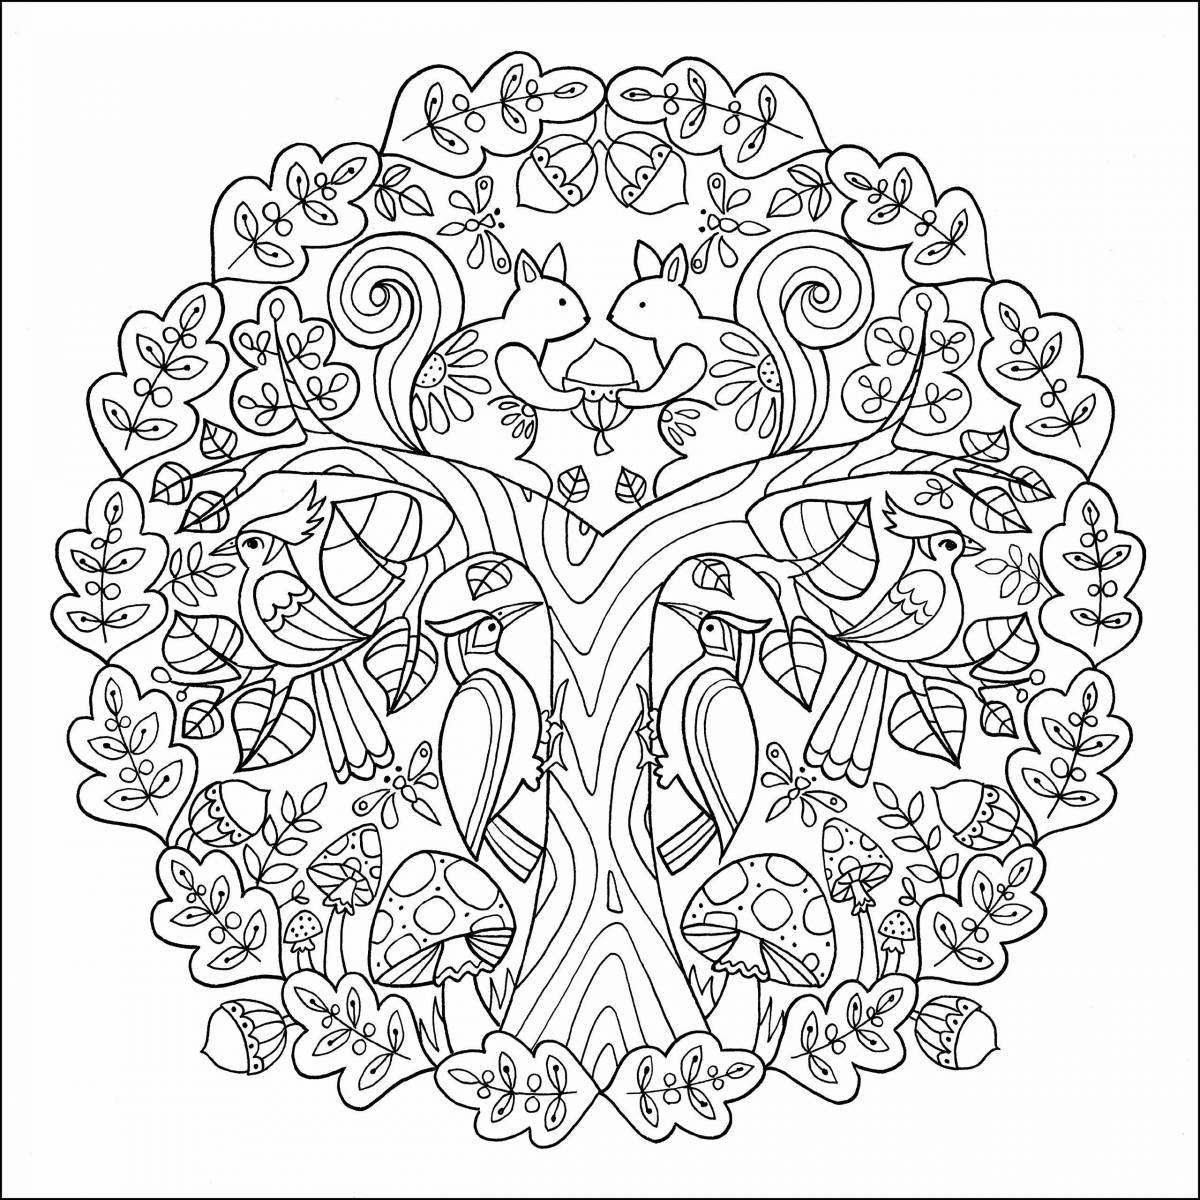 Coloring page dazzling tree of life